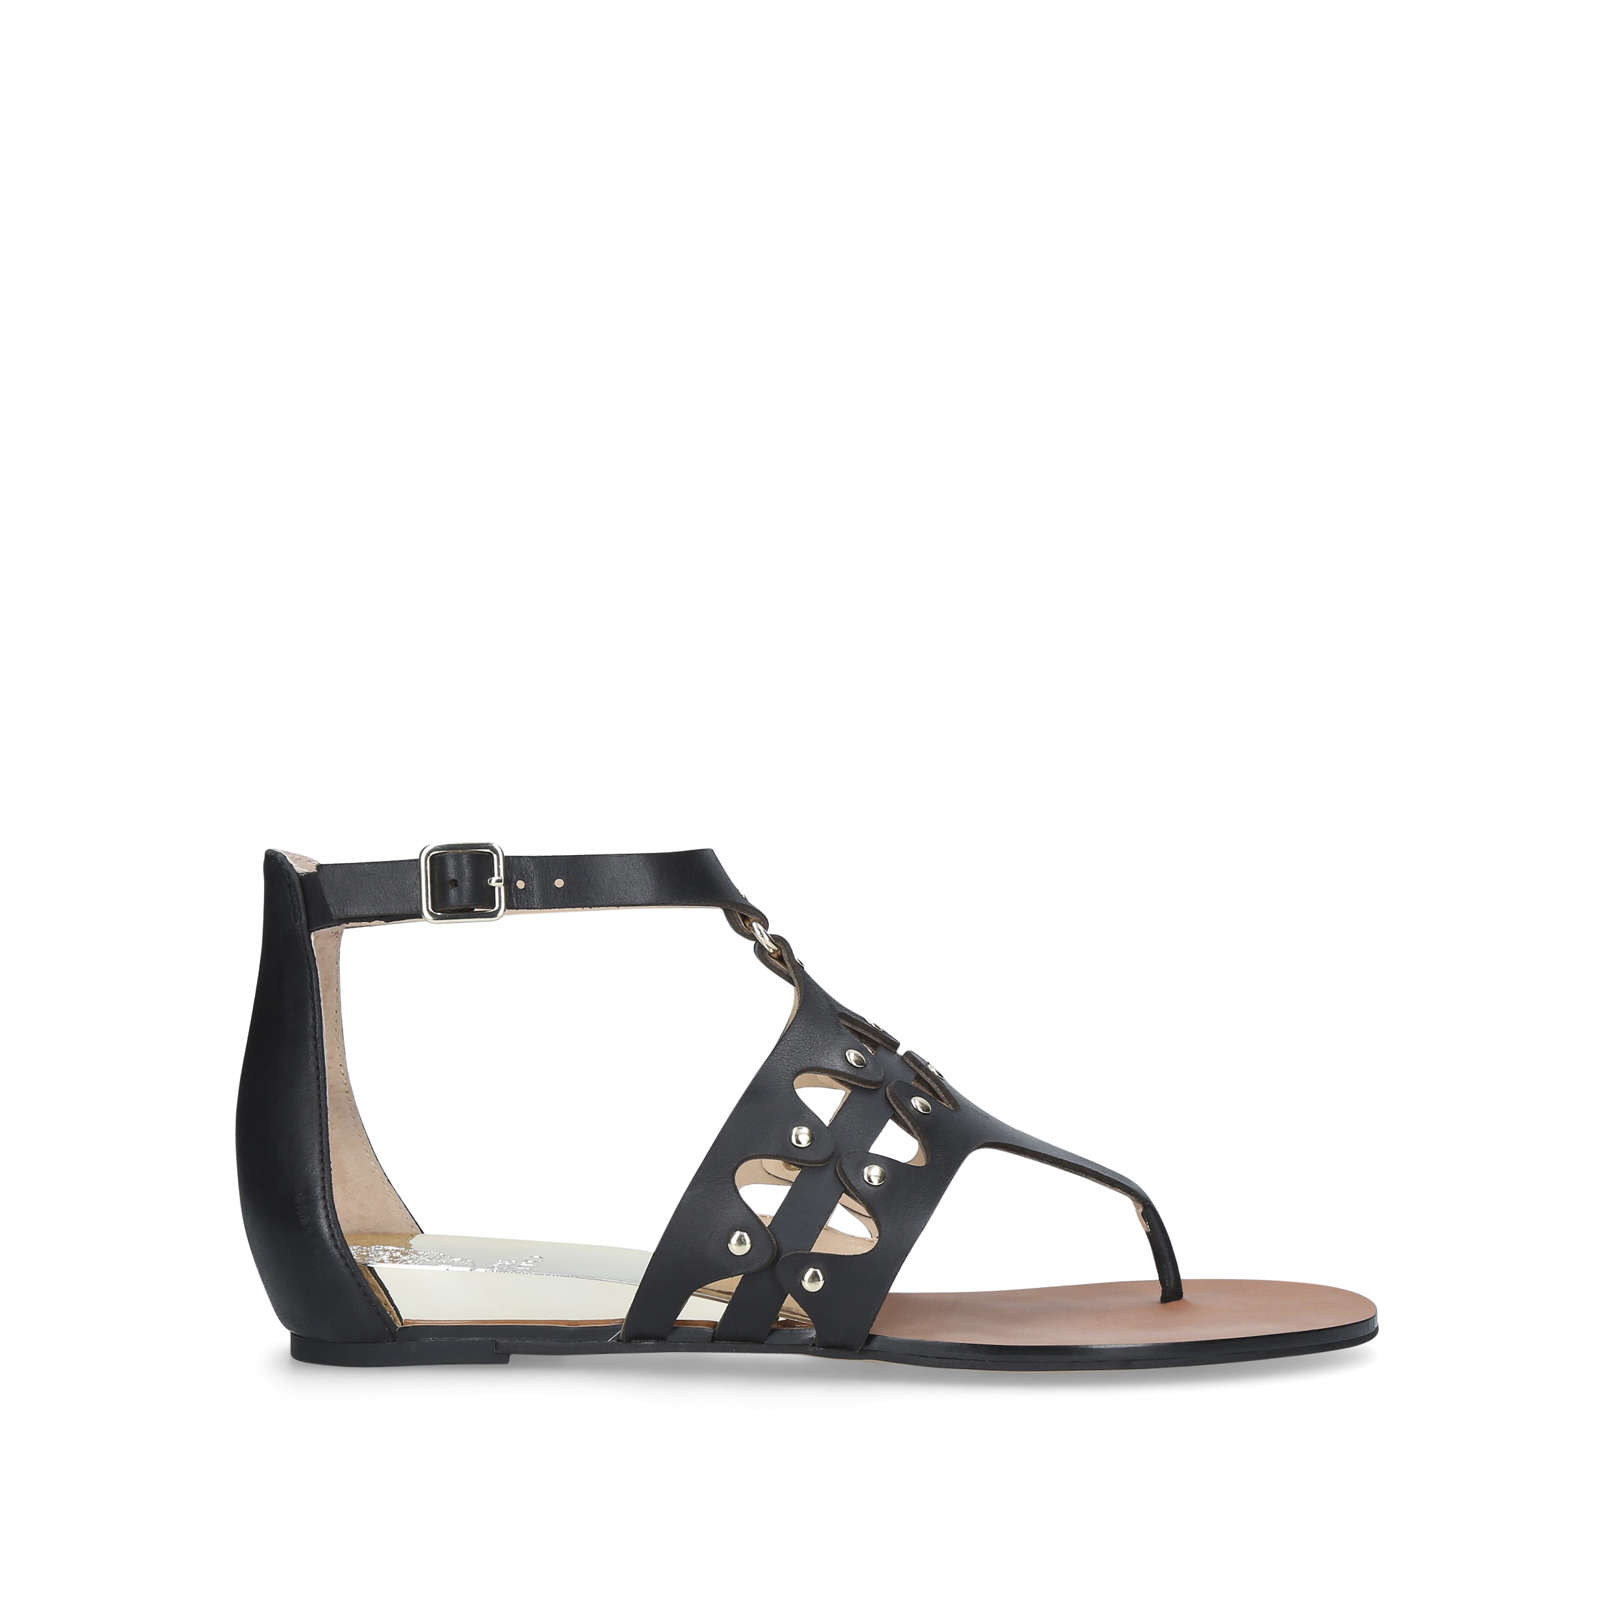 Vince Camuto | ARLANIAN Black Flat Sandals by VINCE CAMUTO